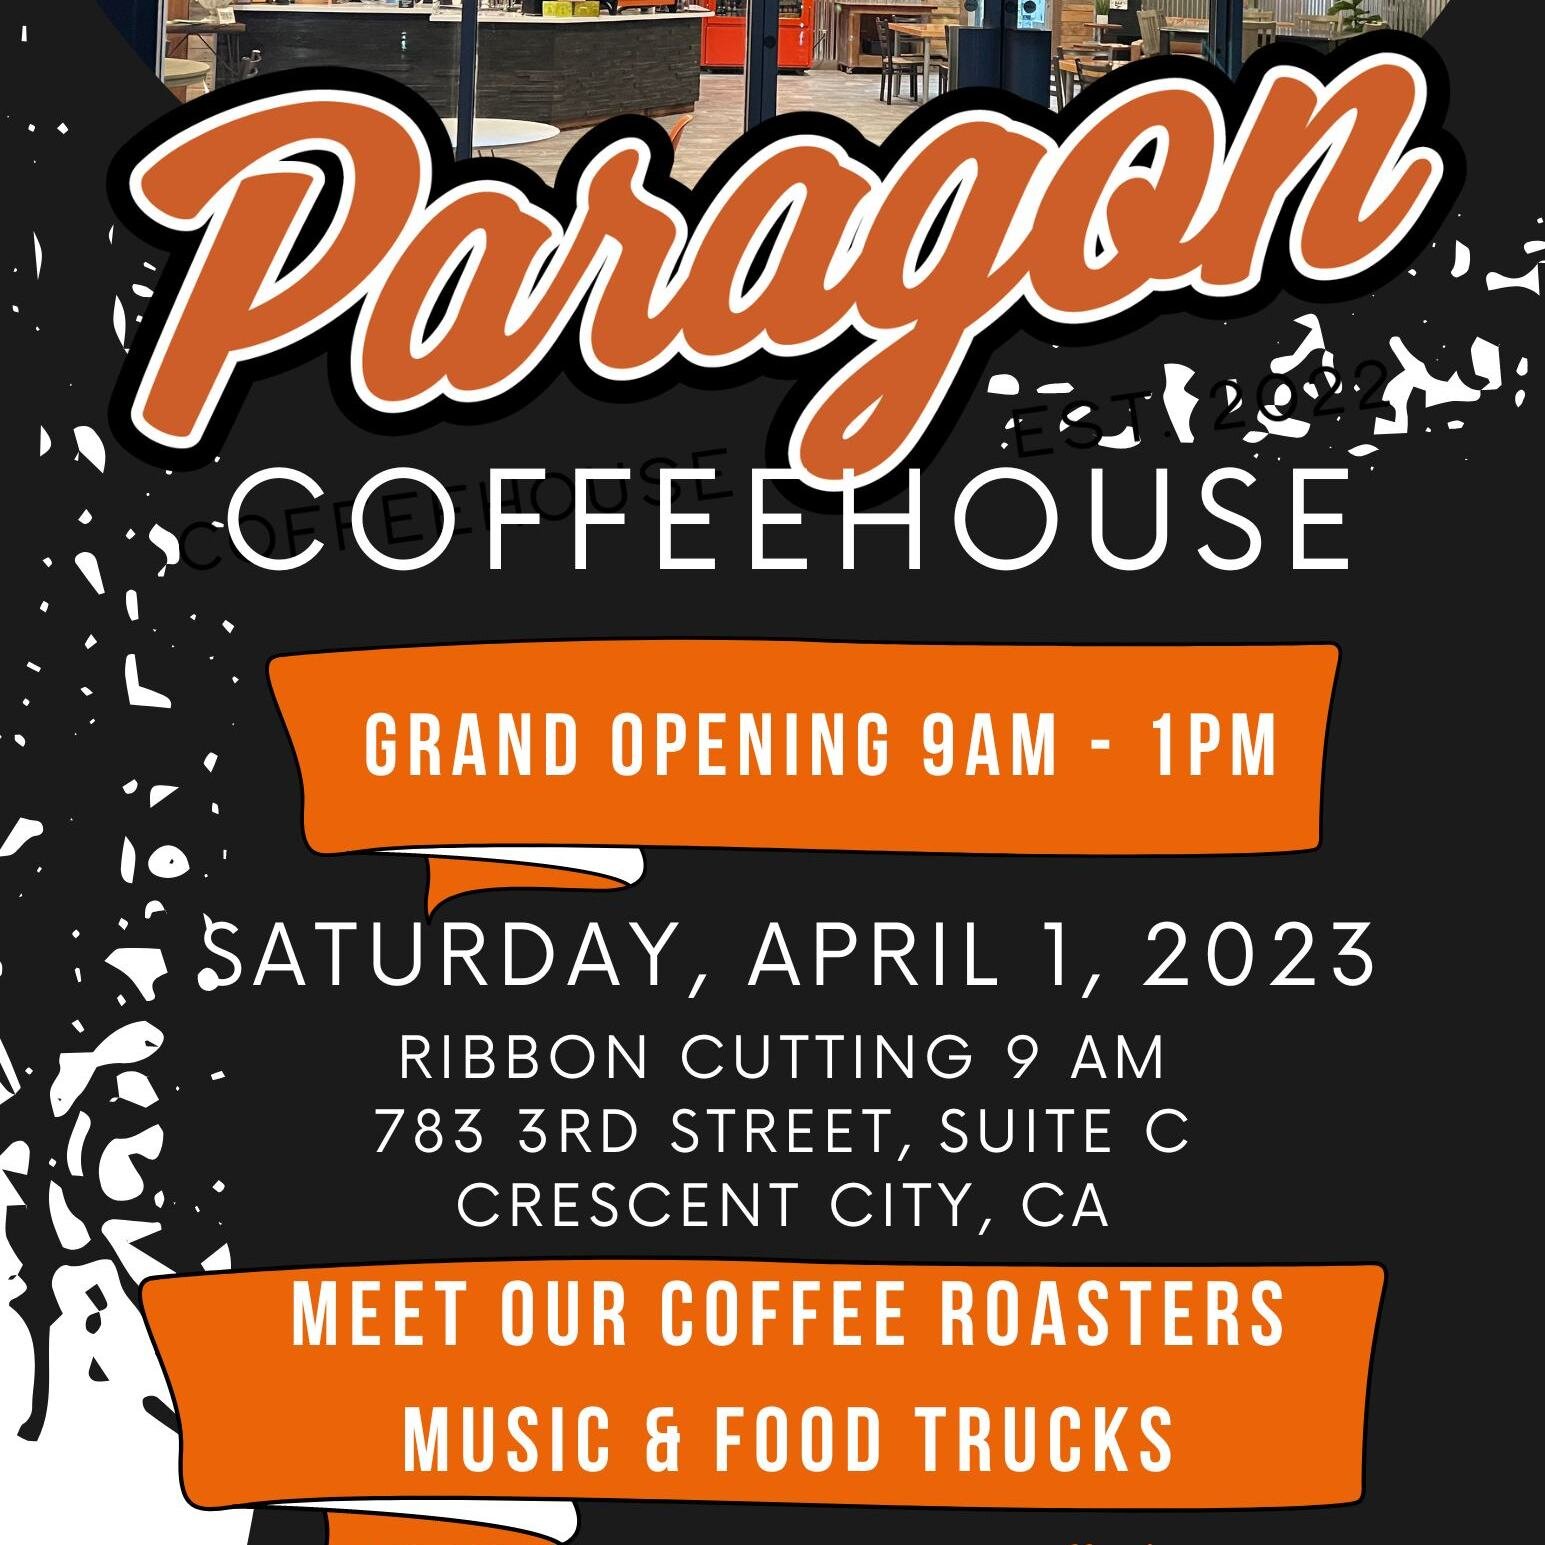 We are excited to be partnering with Paragon Coffeehouse (@paragon_pch), who will be serving Noble Coffee &amp; Tonic at their awesome Crescent City location.

Come Join us for the grand opening of Paragon Coffeehouse in Crescent City.

See you there